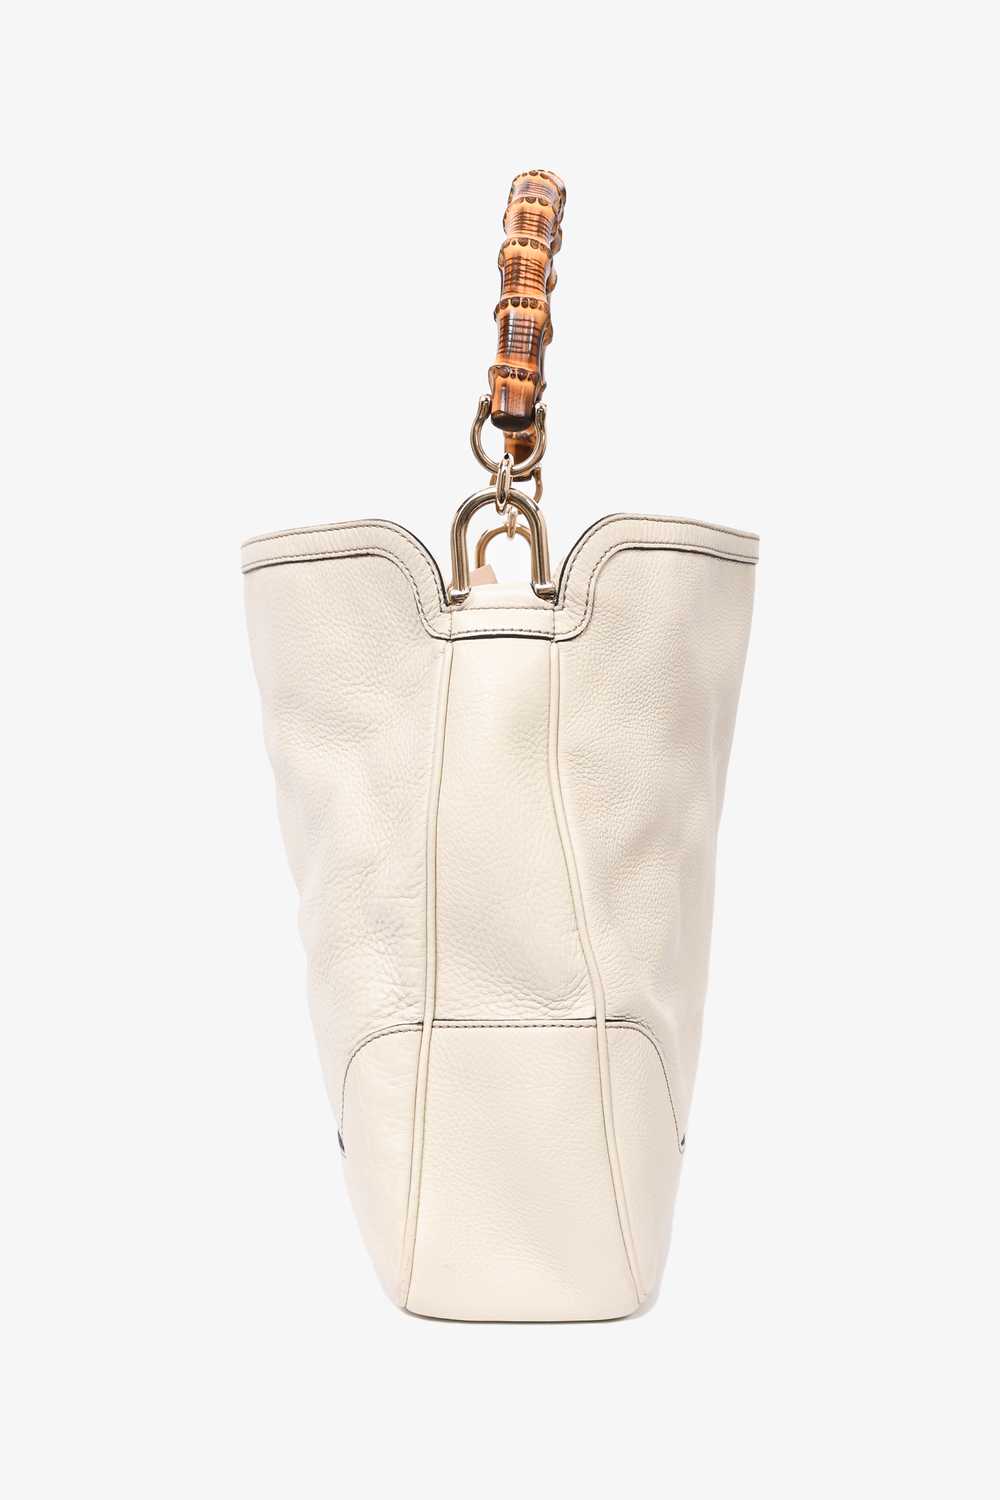 Gucci Cream Leather Bamboo 'Diana' Large Tote - image 4